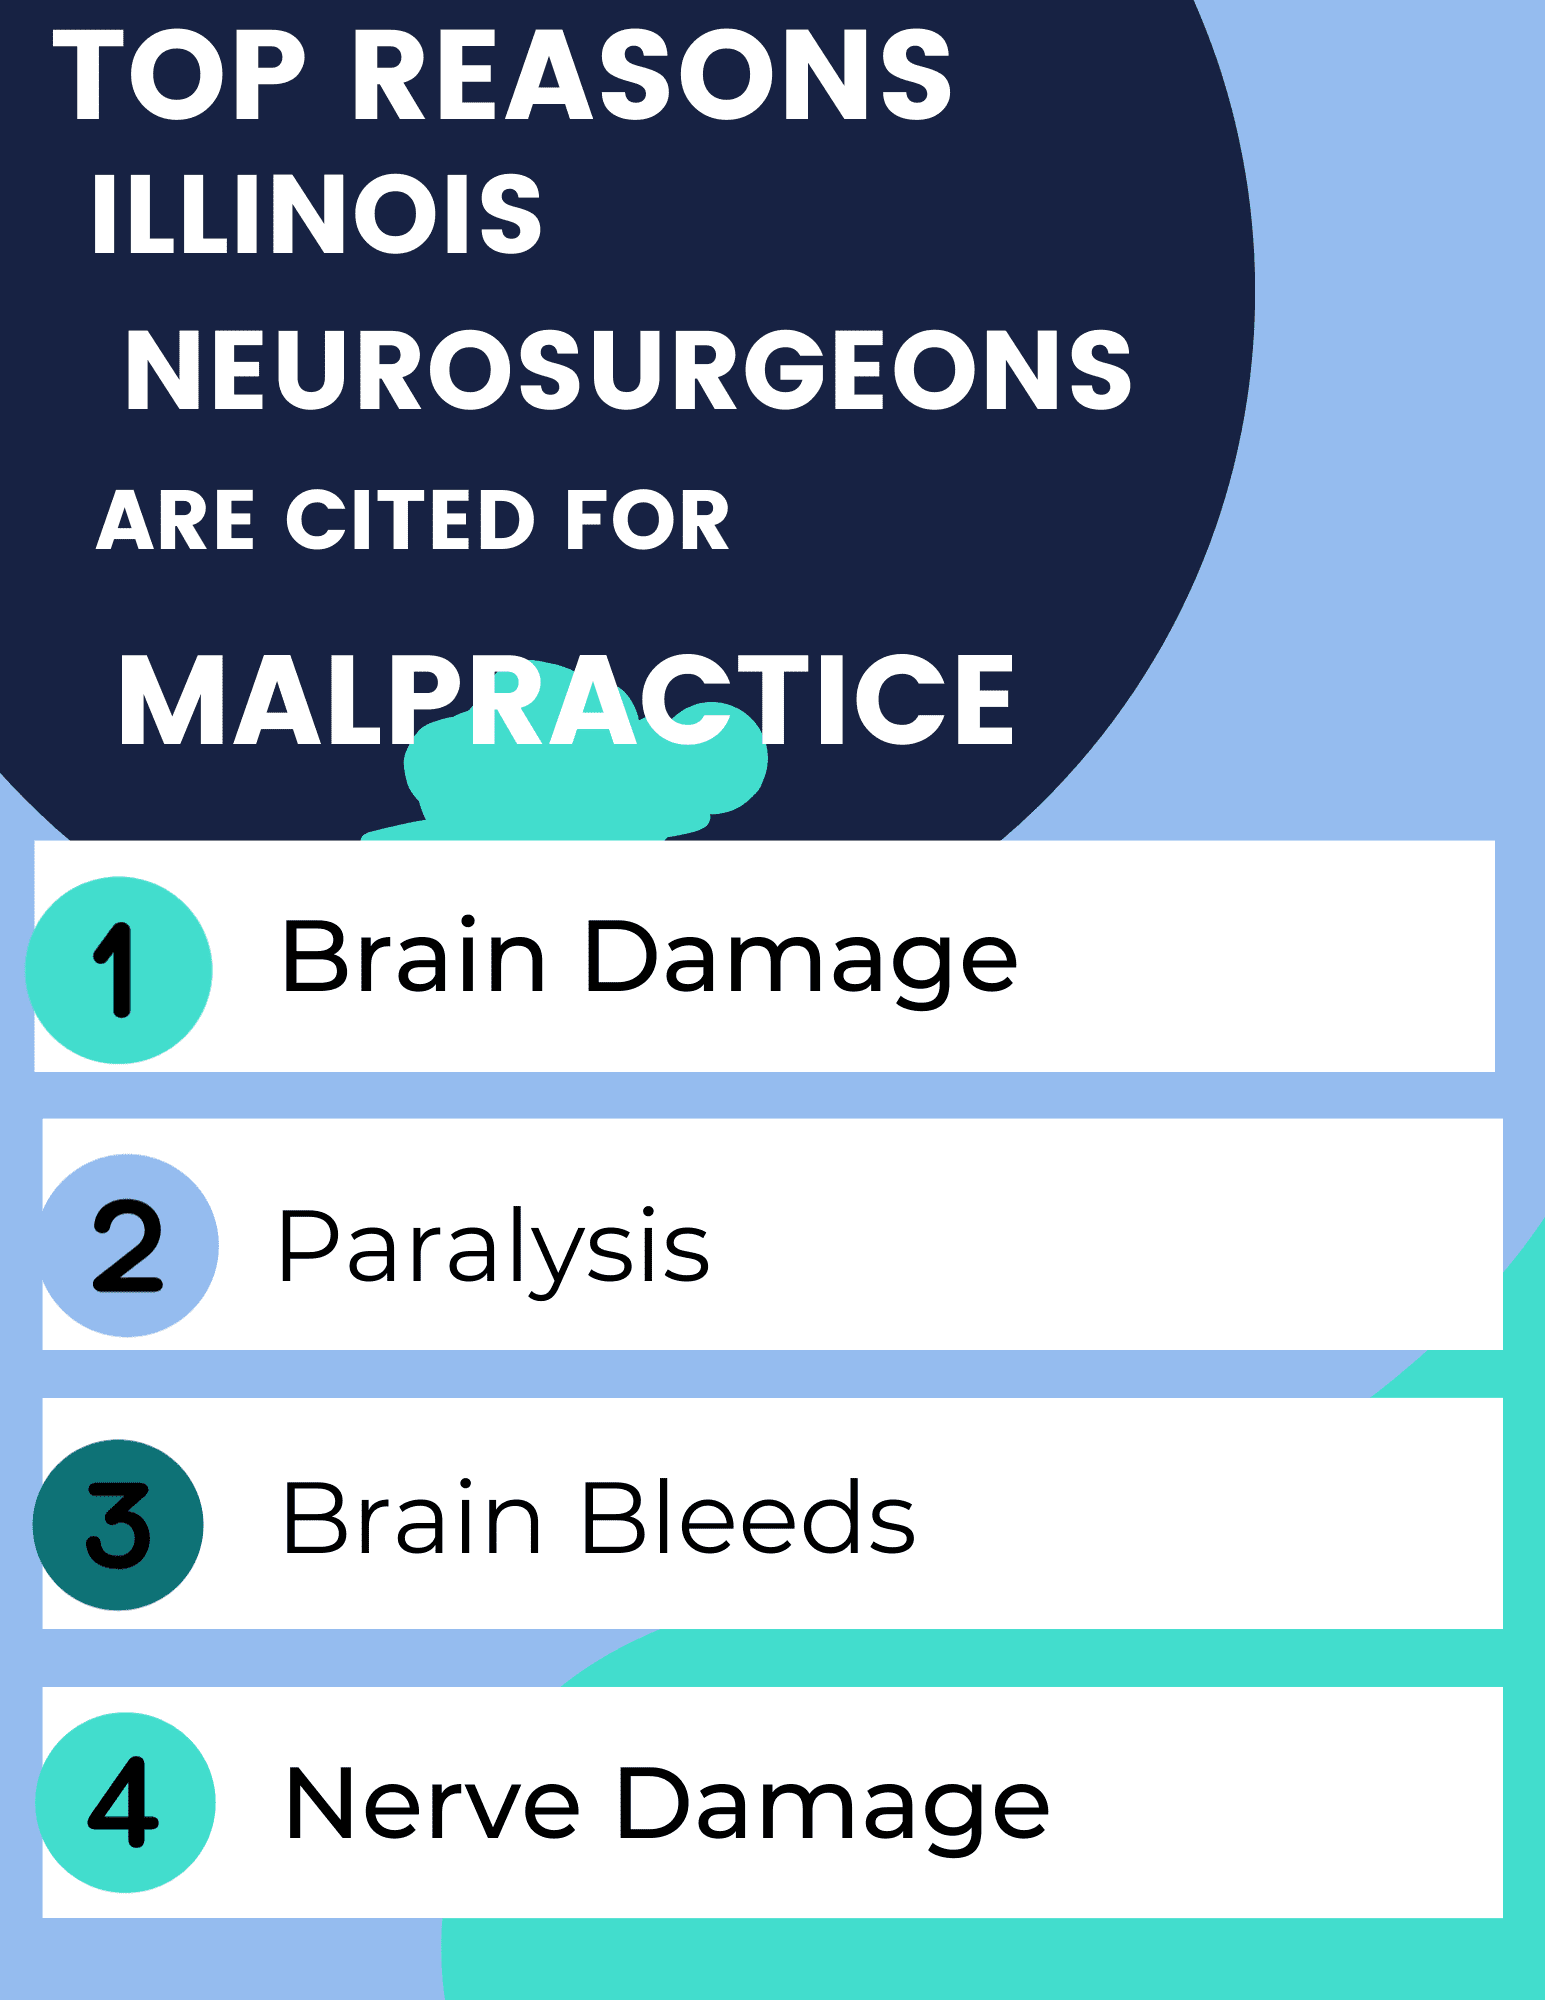 Top reasons IL neurosurgeons are cited for malpractice